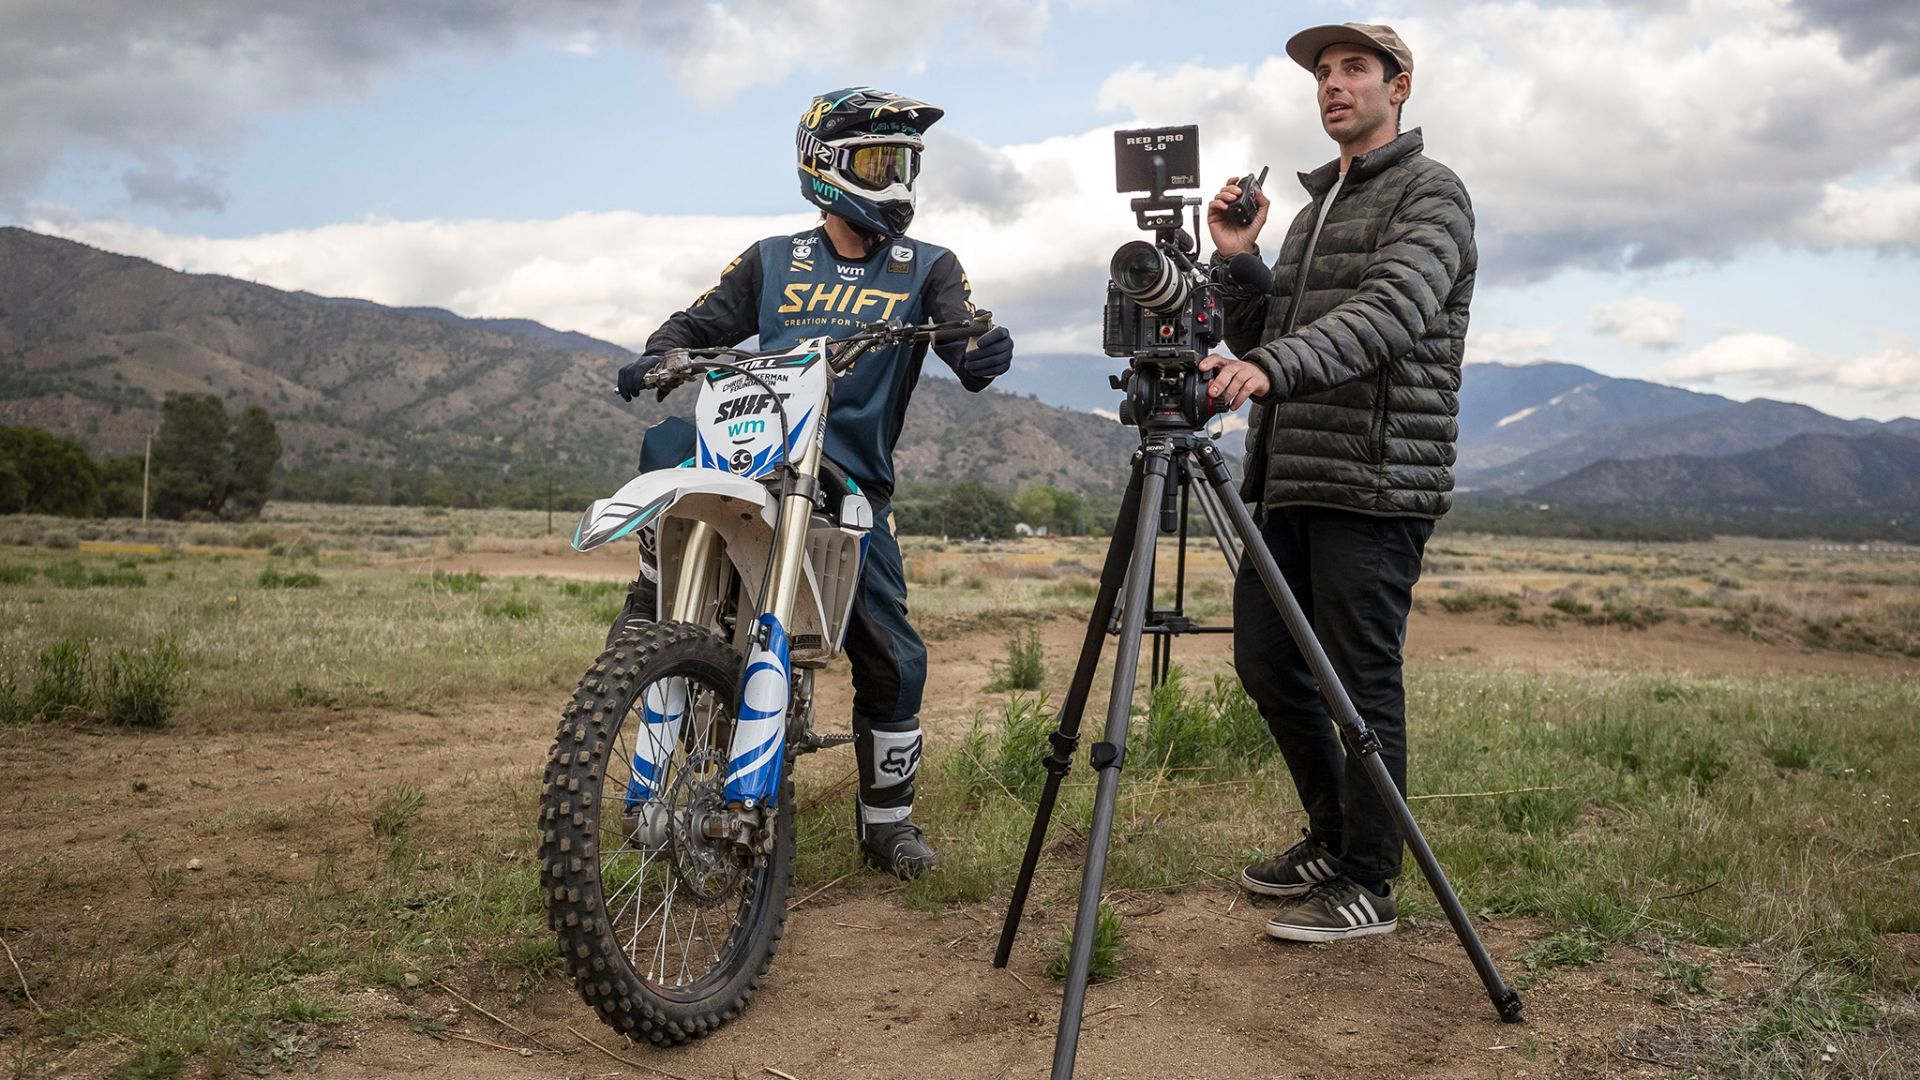 ESPN X Games to Host First-Ever Real Moto Video Competition - ESPN Press  Room U.S.